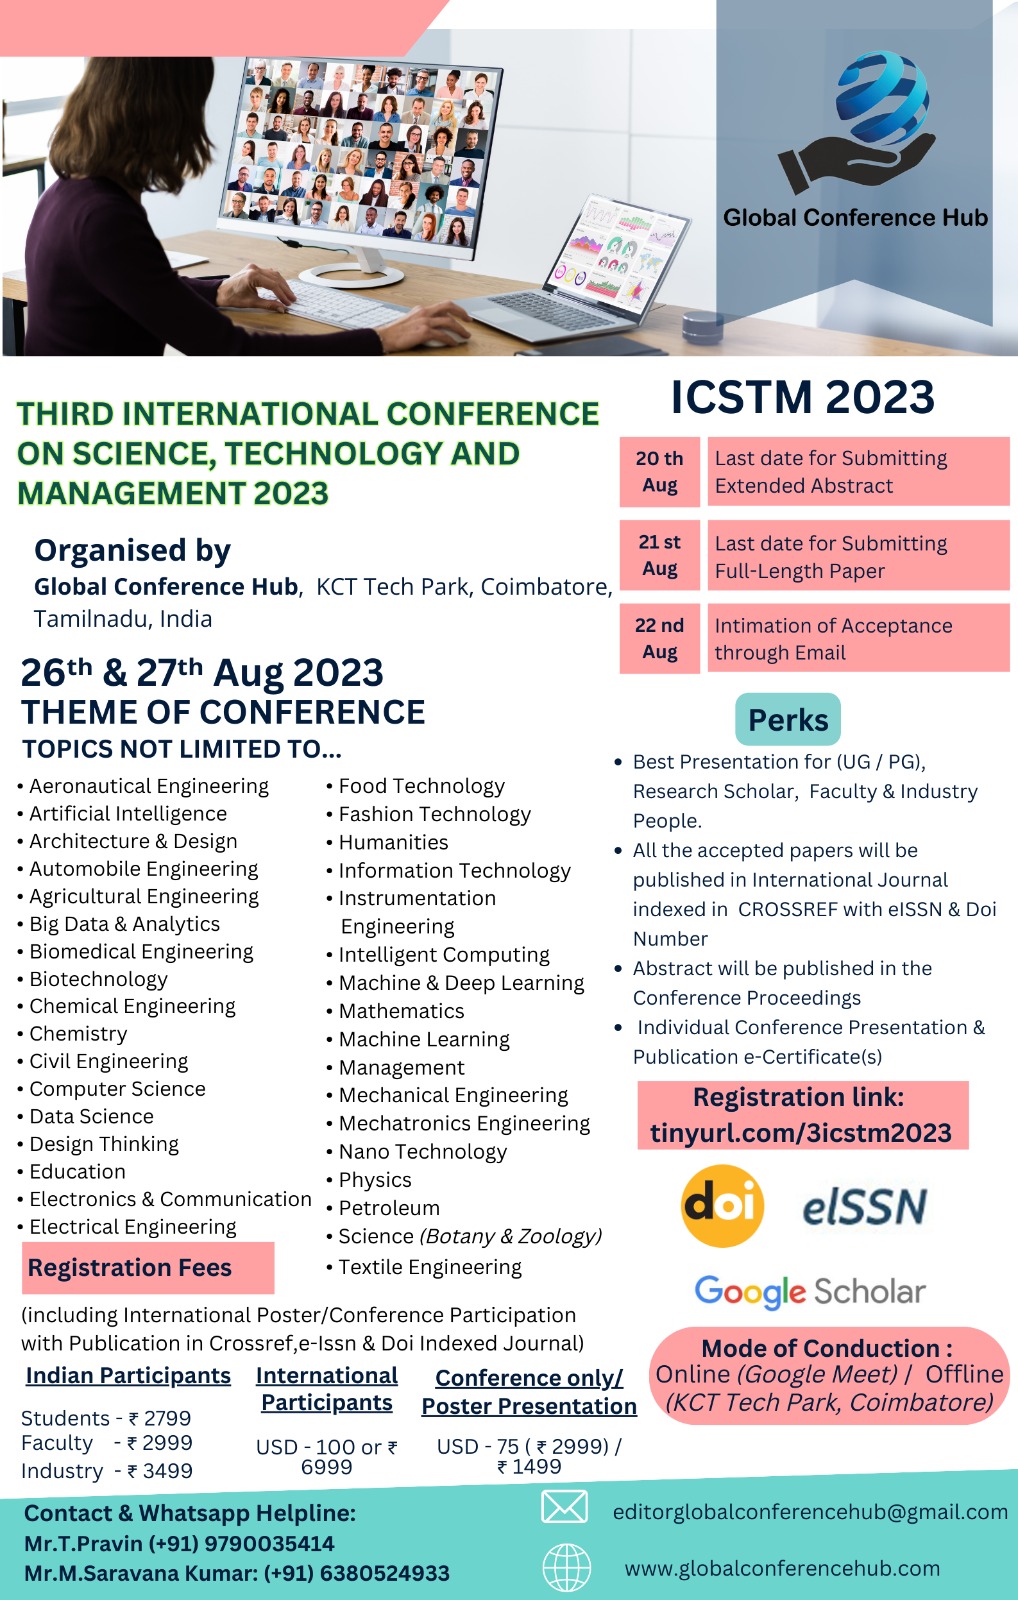 Third International Conference on Science, Technology and Management ICSTM 2023